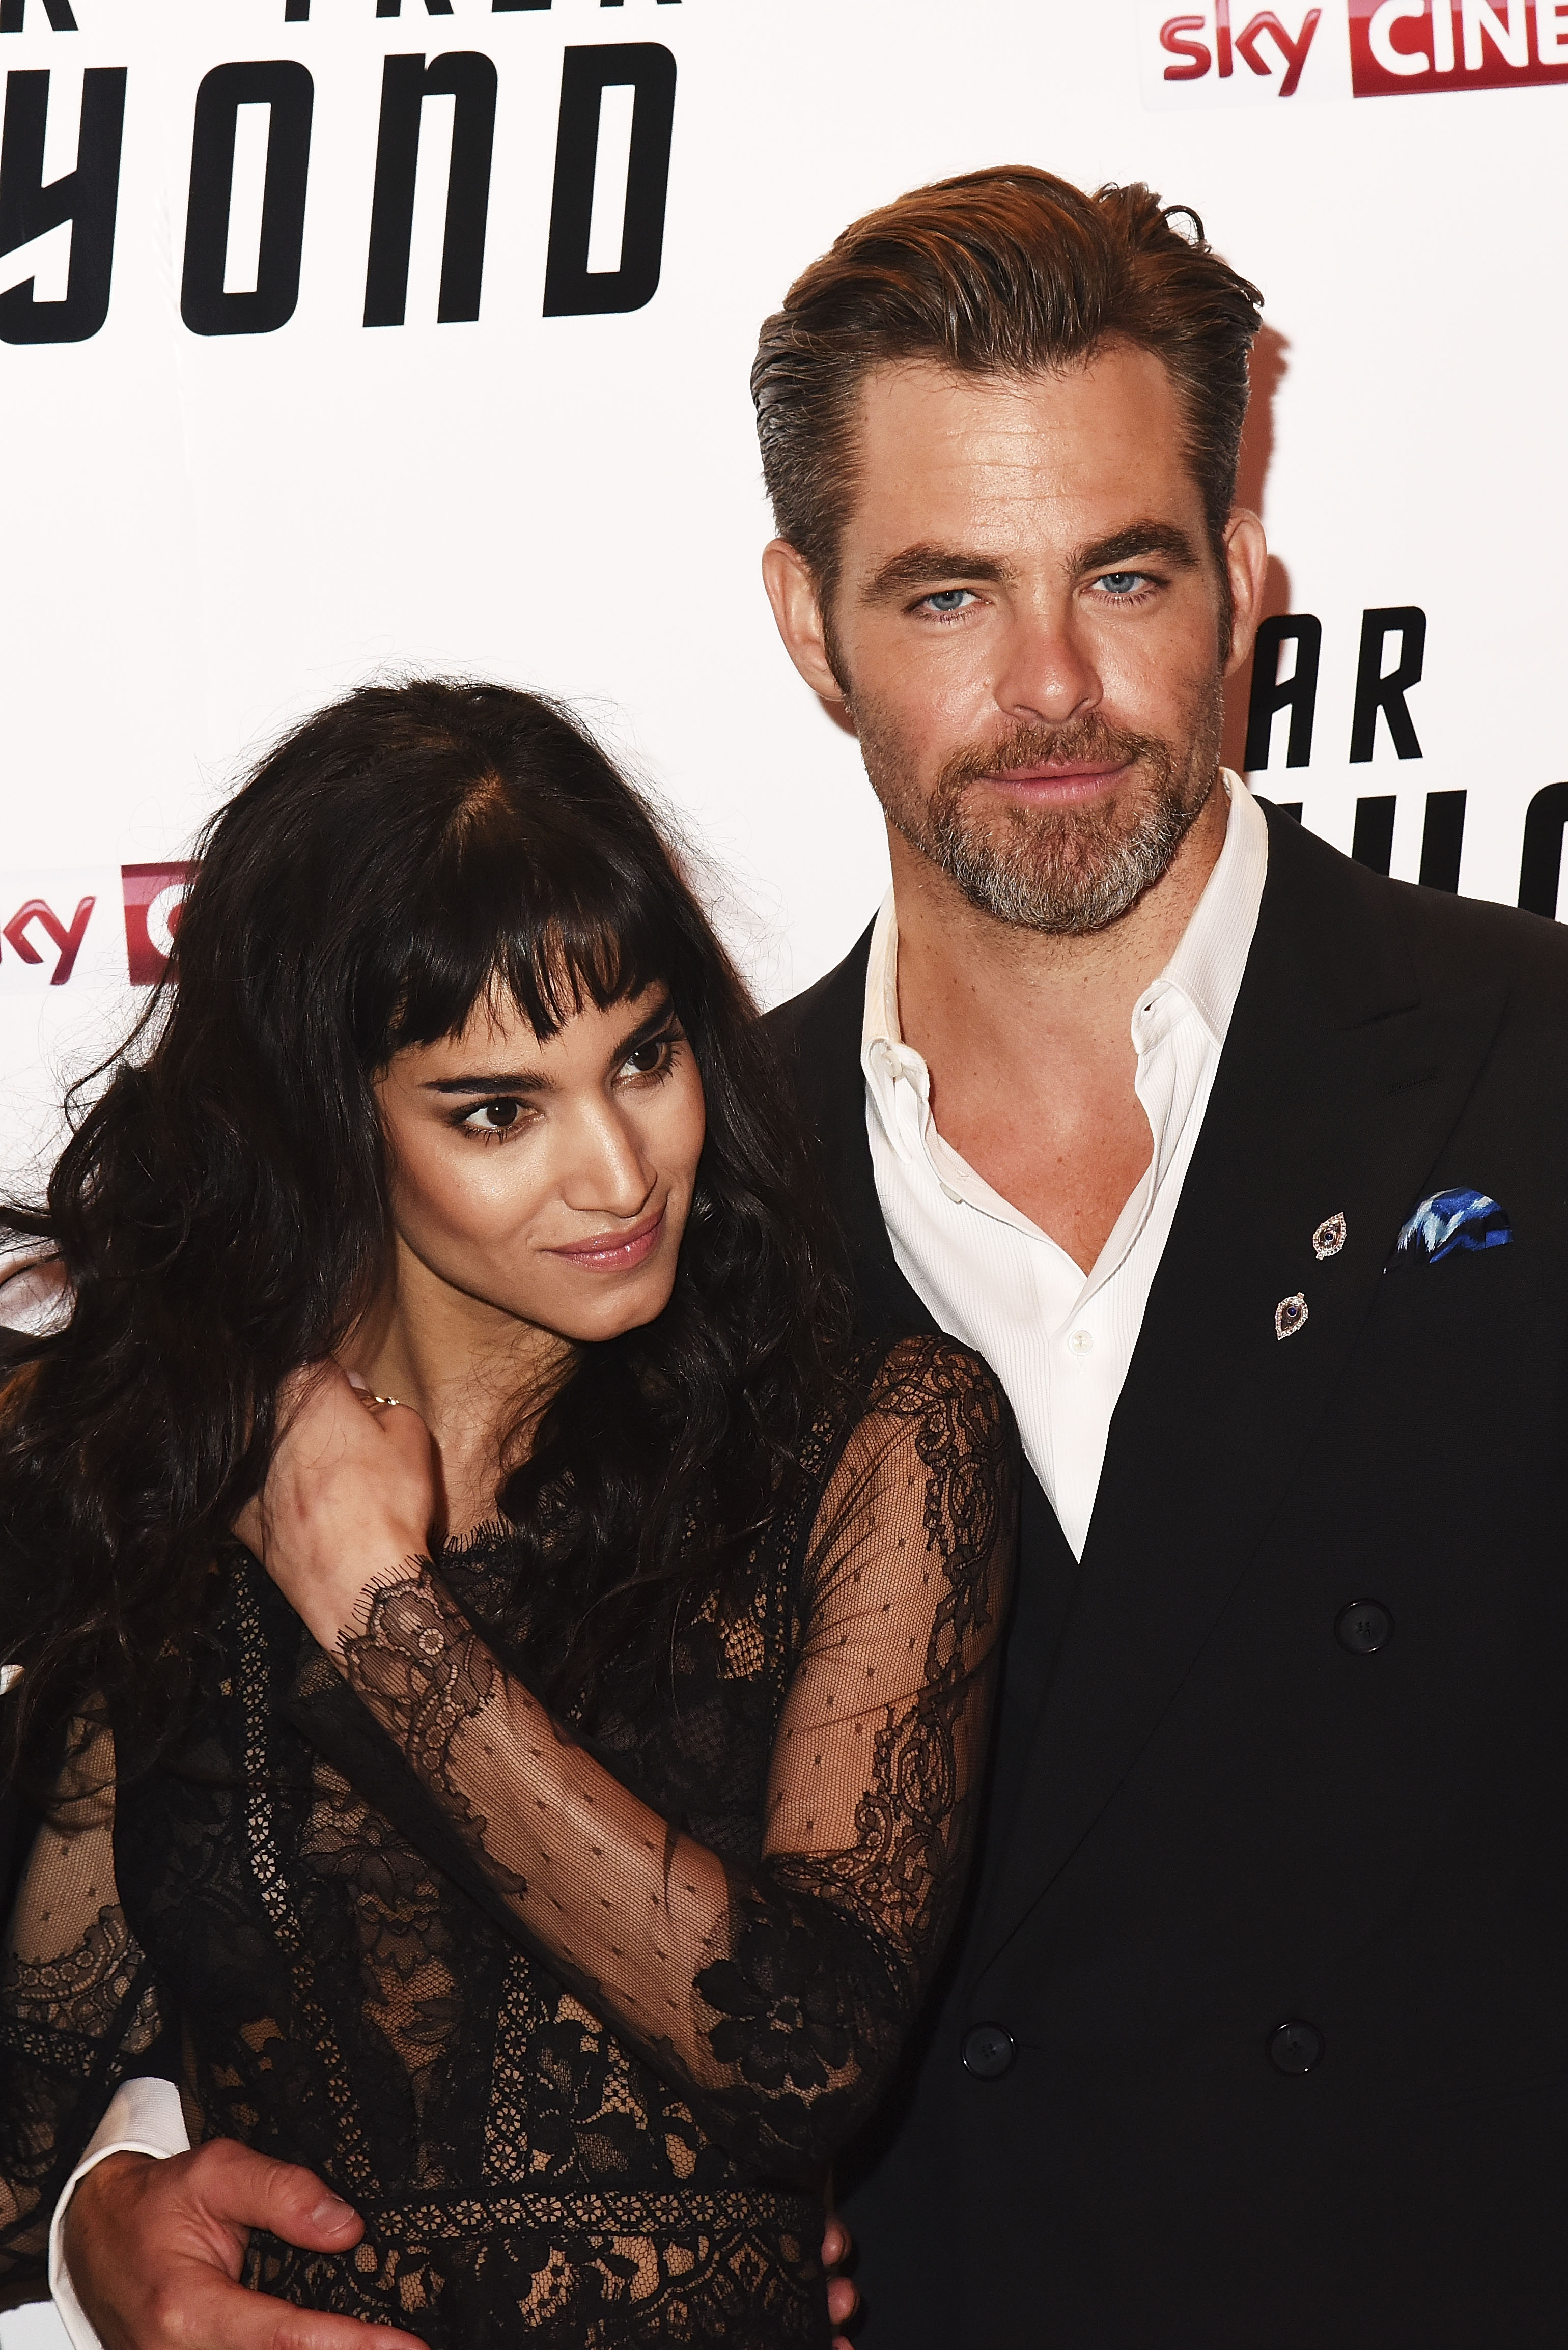 Sofia Boutella and Chris Pine attend the U.K. Premiere of "Star Trek Beyond" at Empire Leicester Square on July 12, 2016, in London, England. | Source: Getty Images